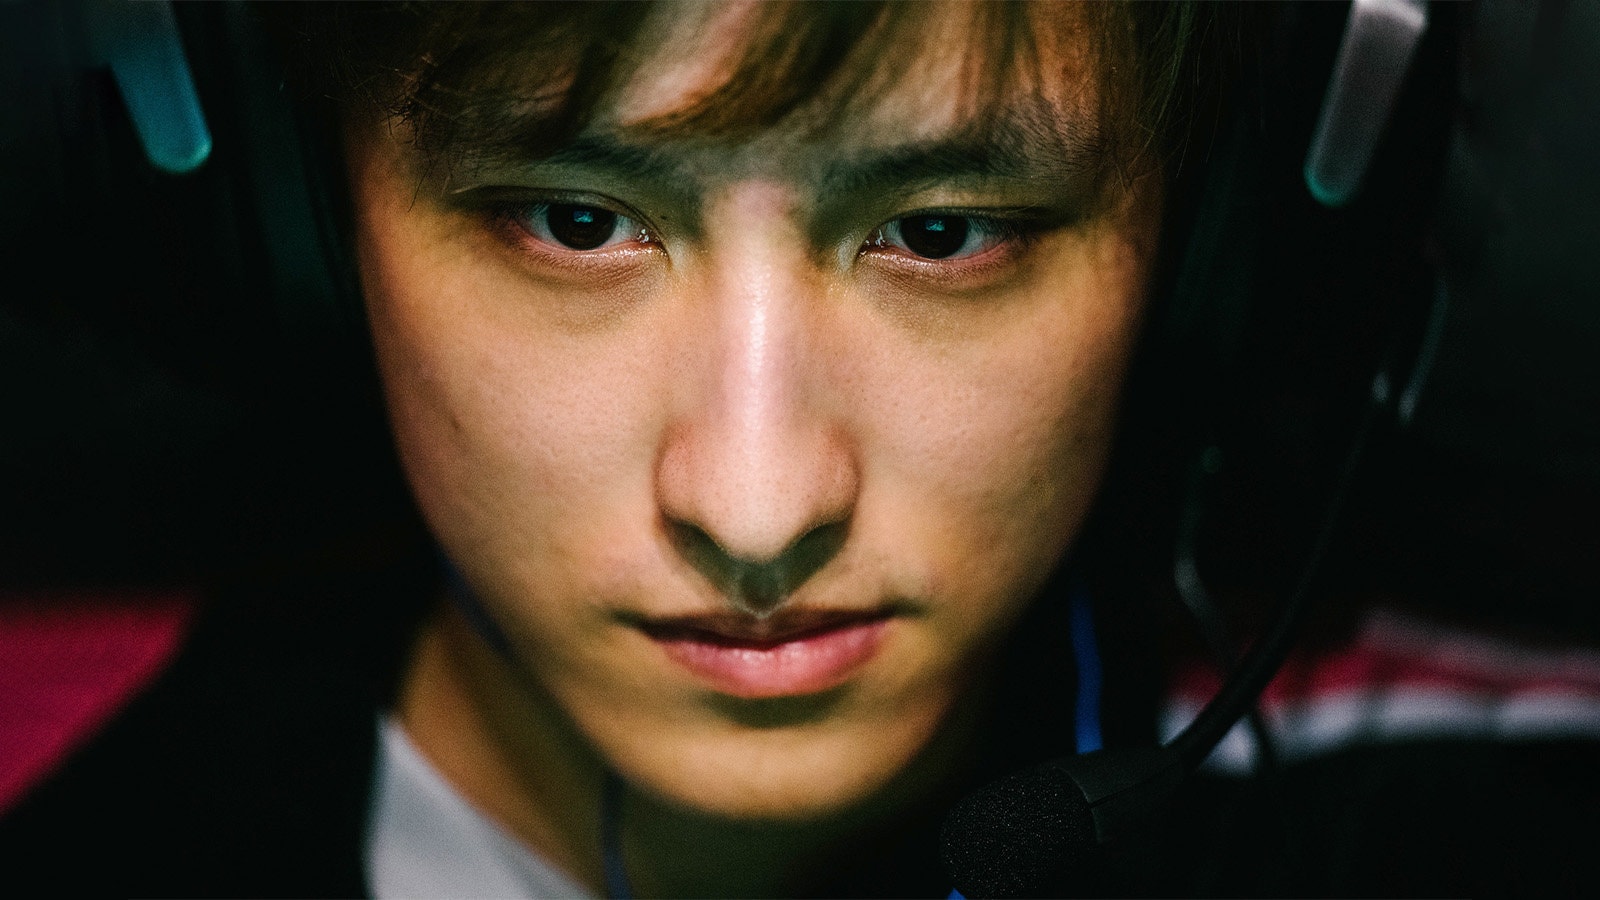 PSG.LGD announces three new players to replace Ame, Faith_bian, and